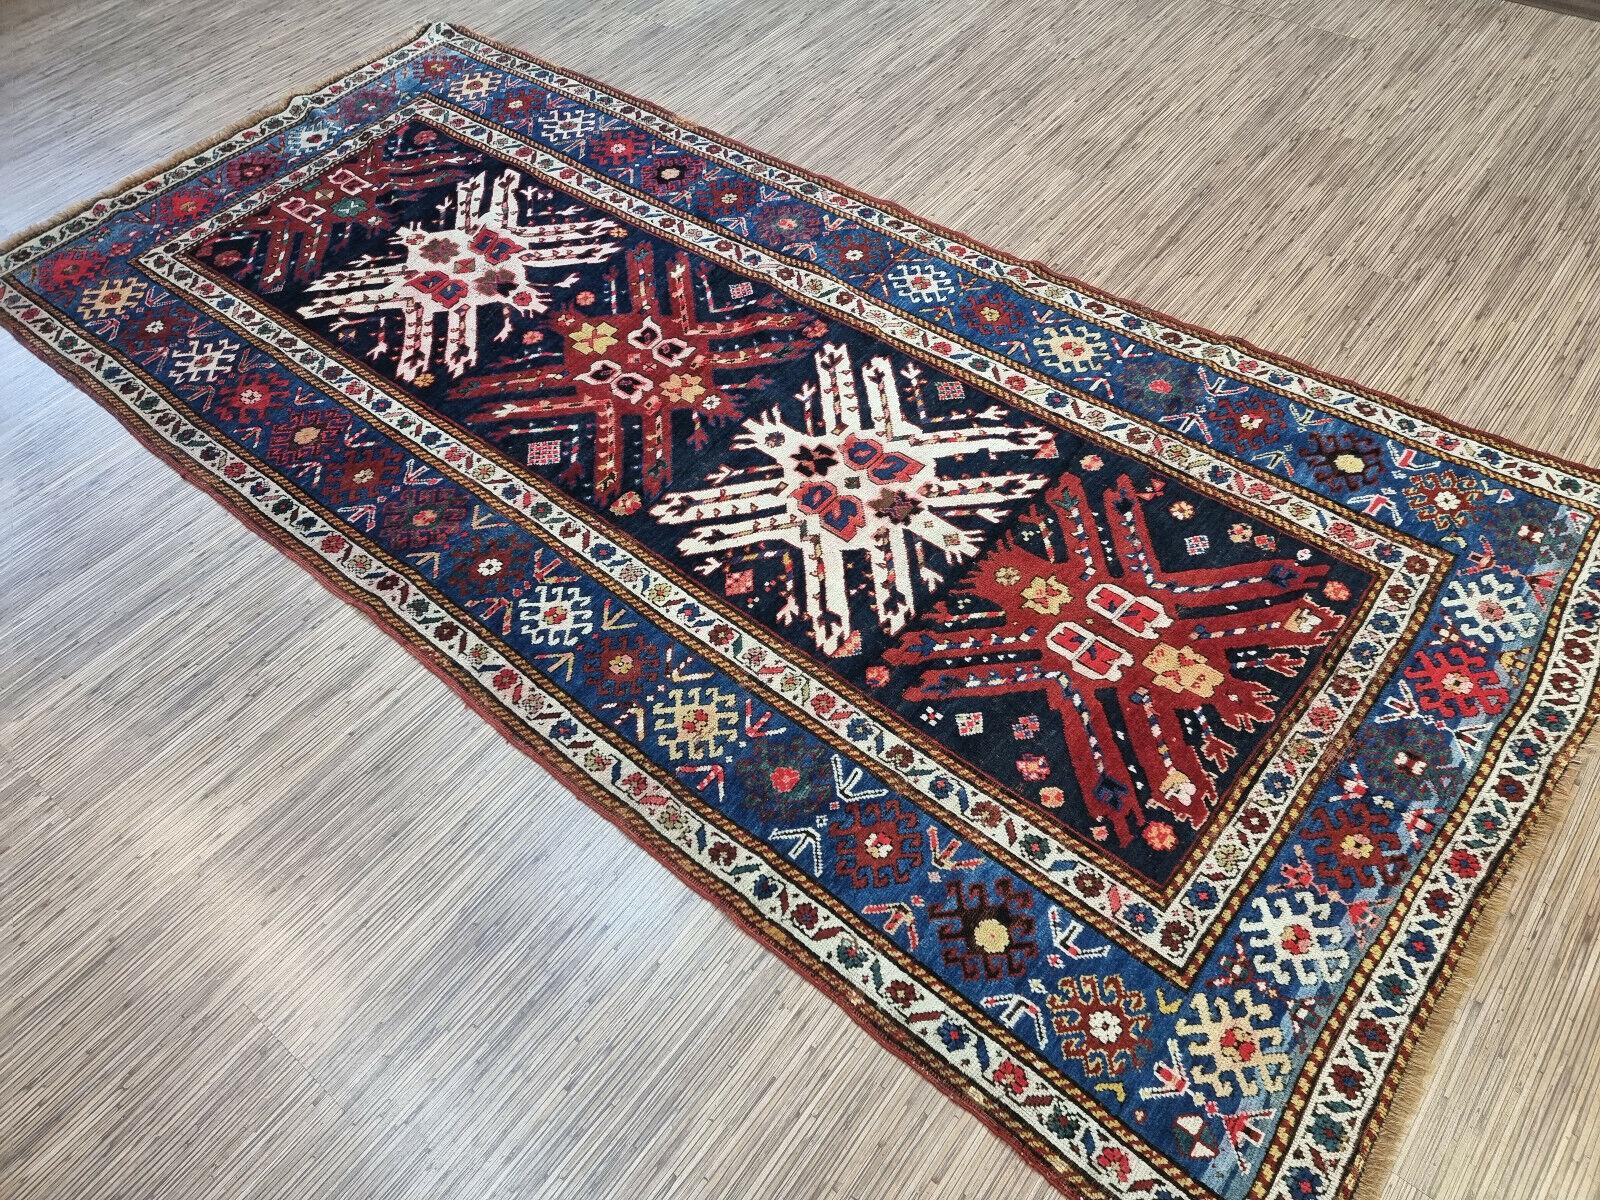 Bring home a piece of history with our Handmade Antique Caucasian Kazak Rug. This stunning rug was woven in the 1900s by the Kazak people, a nomadic tribe from the Caucasus region. The rug measures 4.1’ x 8.9’, making it a perfect fit for any